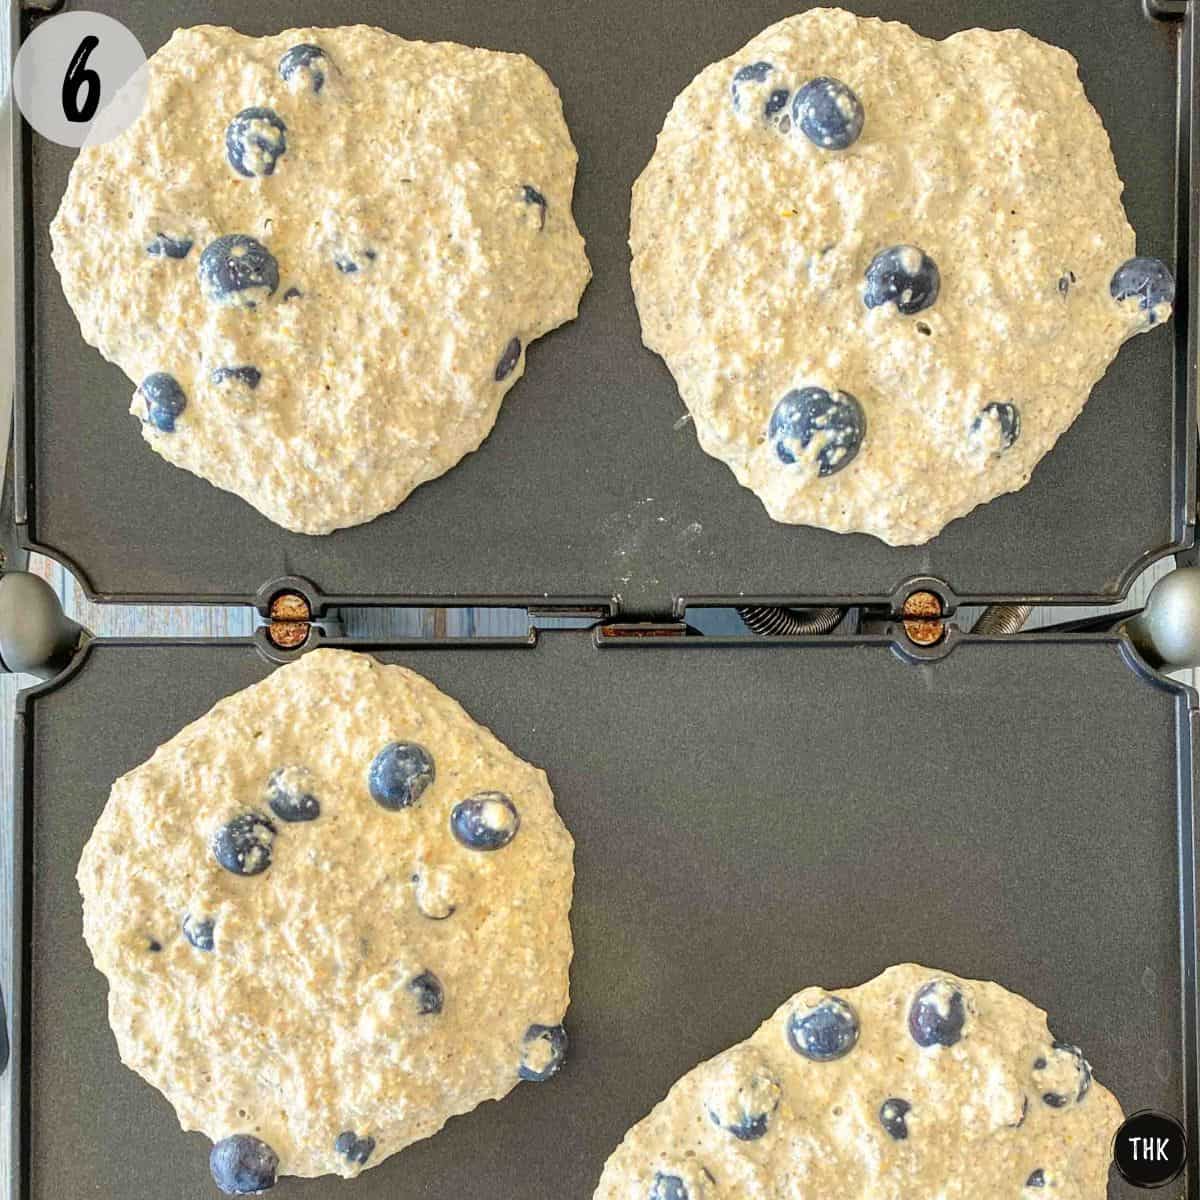 Blueberry pancakes being cooked on griddle.